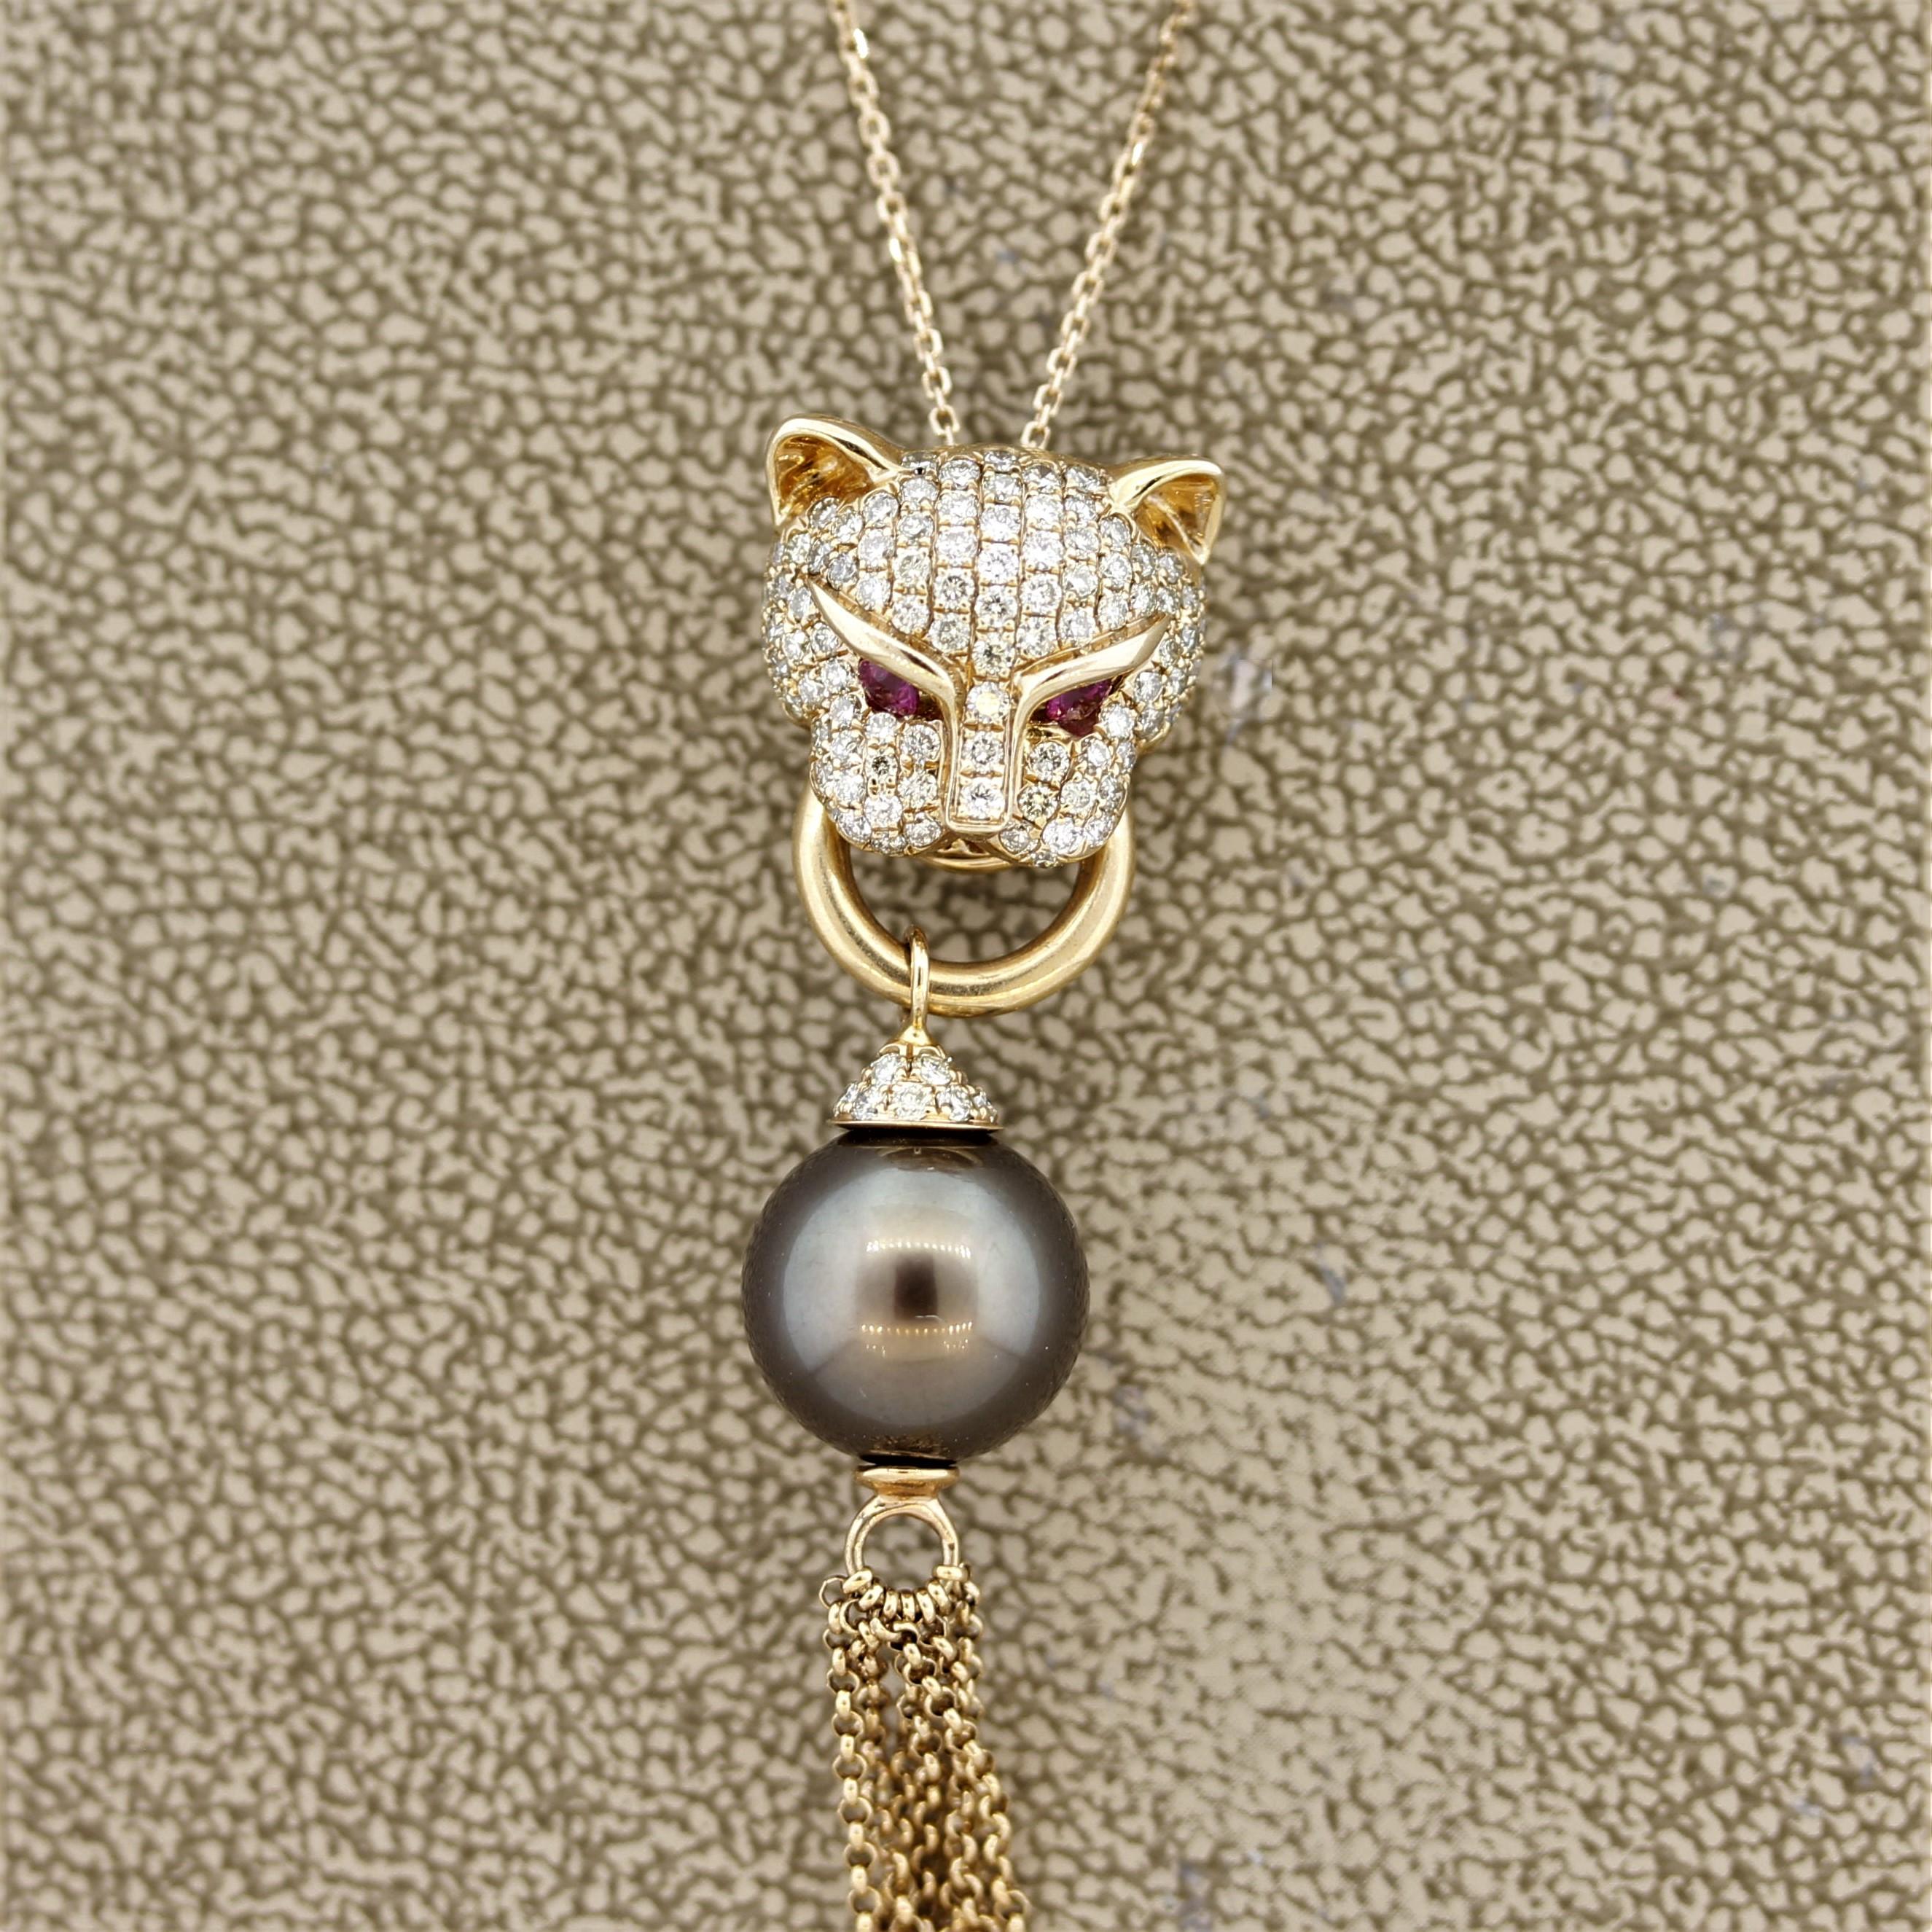 A stunning pendant featuring a strong and loyal panther. It is set with 0.83 carats of round brilliant cut diamonds along with 2 rubies weighing 0.11 carats which are used as its glowing eyes. In its mouth is a hoop of 18k rose gold which leads to a